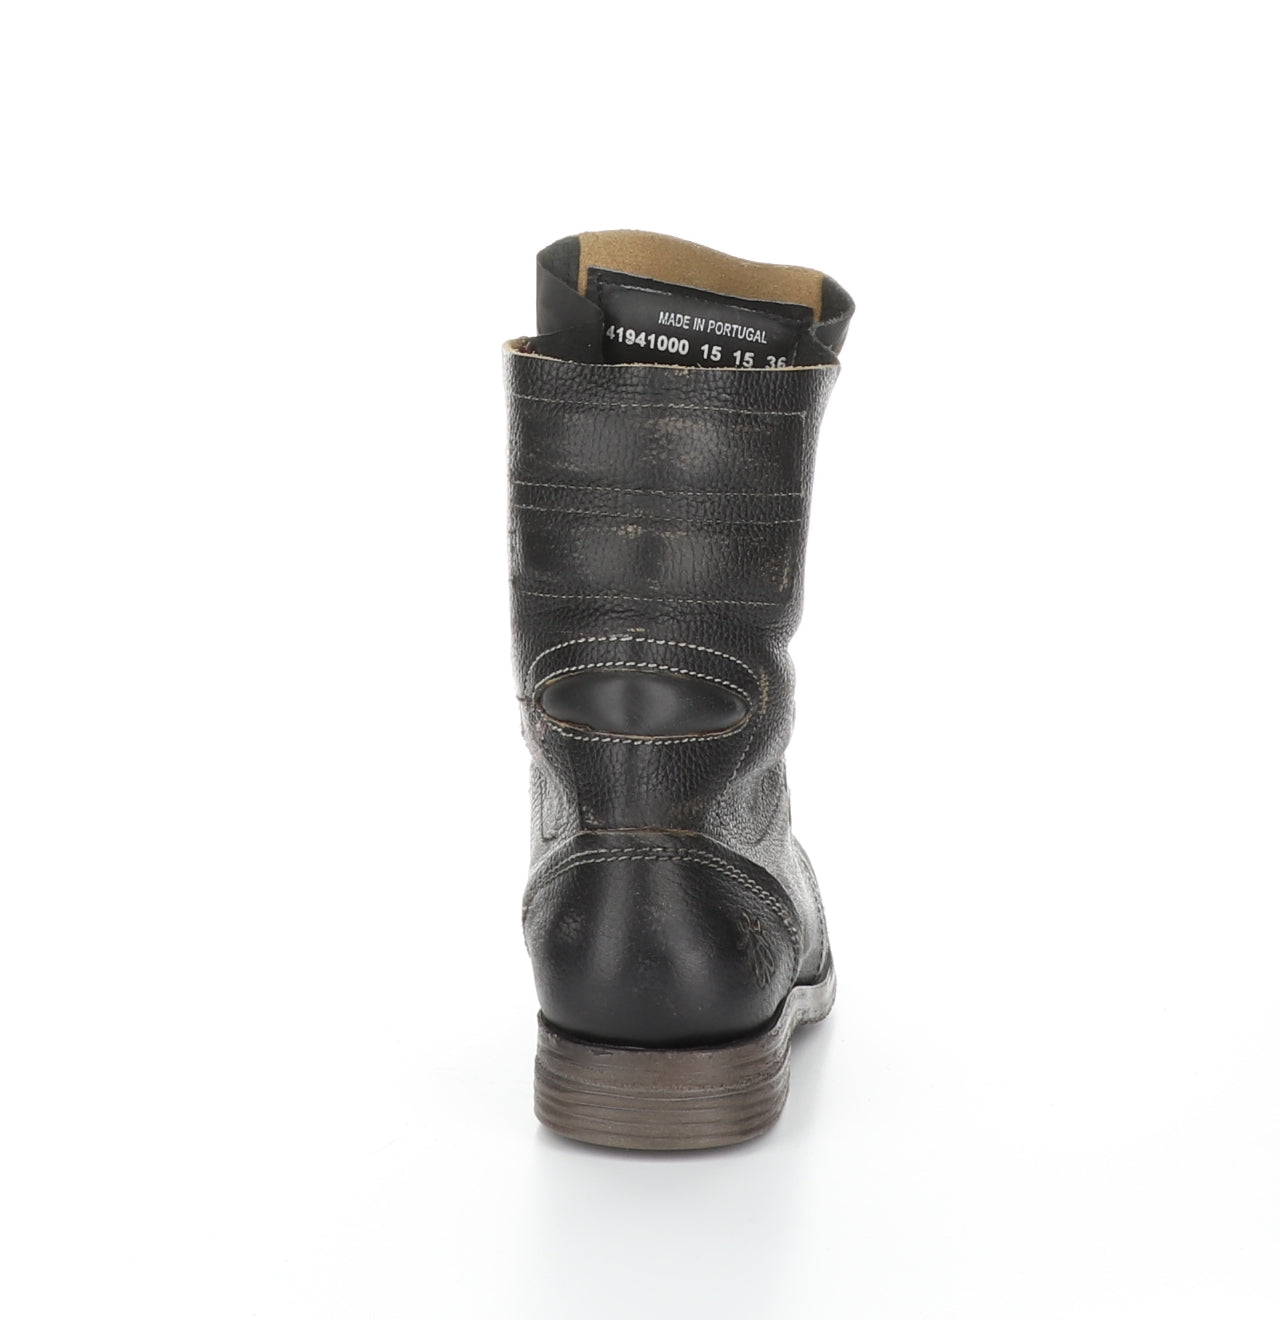 Fly London Stiff in black boot available at Shoe Muse